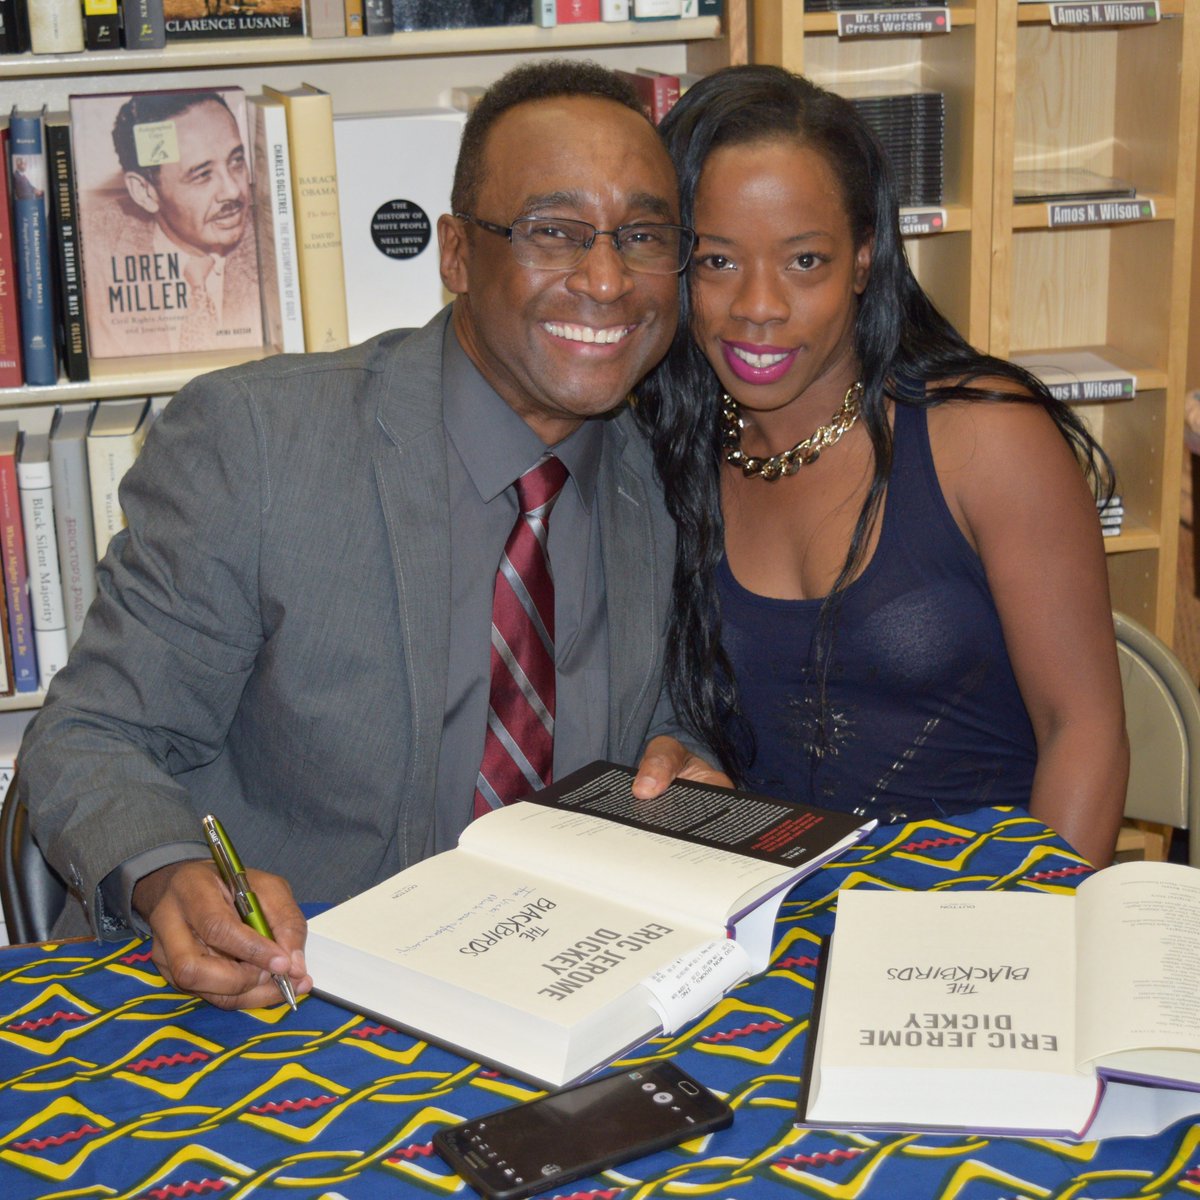 Celebrating the life of our friend, brother, and #favoriteauthor @EricJDickey on this day as his new book is released. #EJDtribute #ericjeromedickey @EsoWon #thesunofmrsuleman @DuttonBooks #shotbyjason - this was a #booksigning in 2016. @VictoriaECM #theblackbirds @quianavictoria